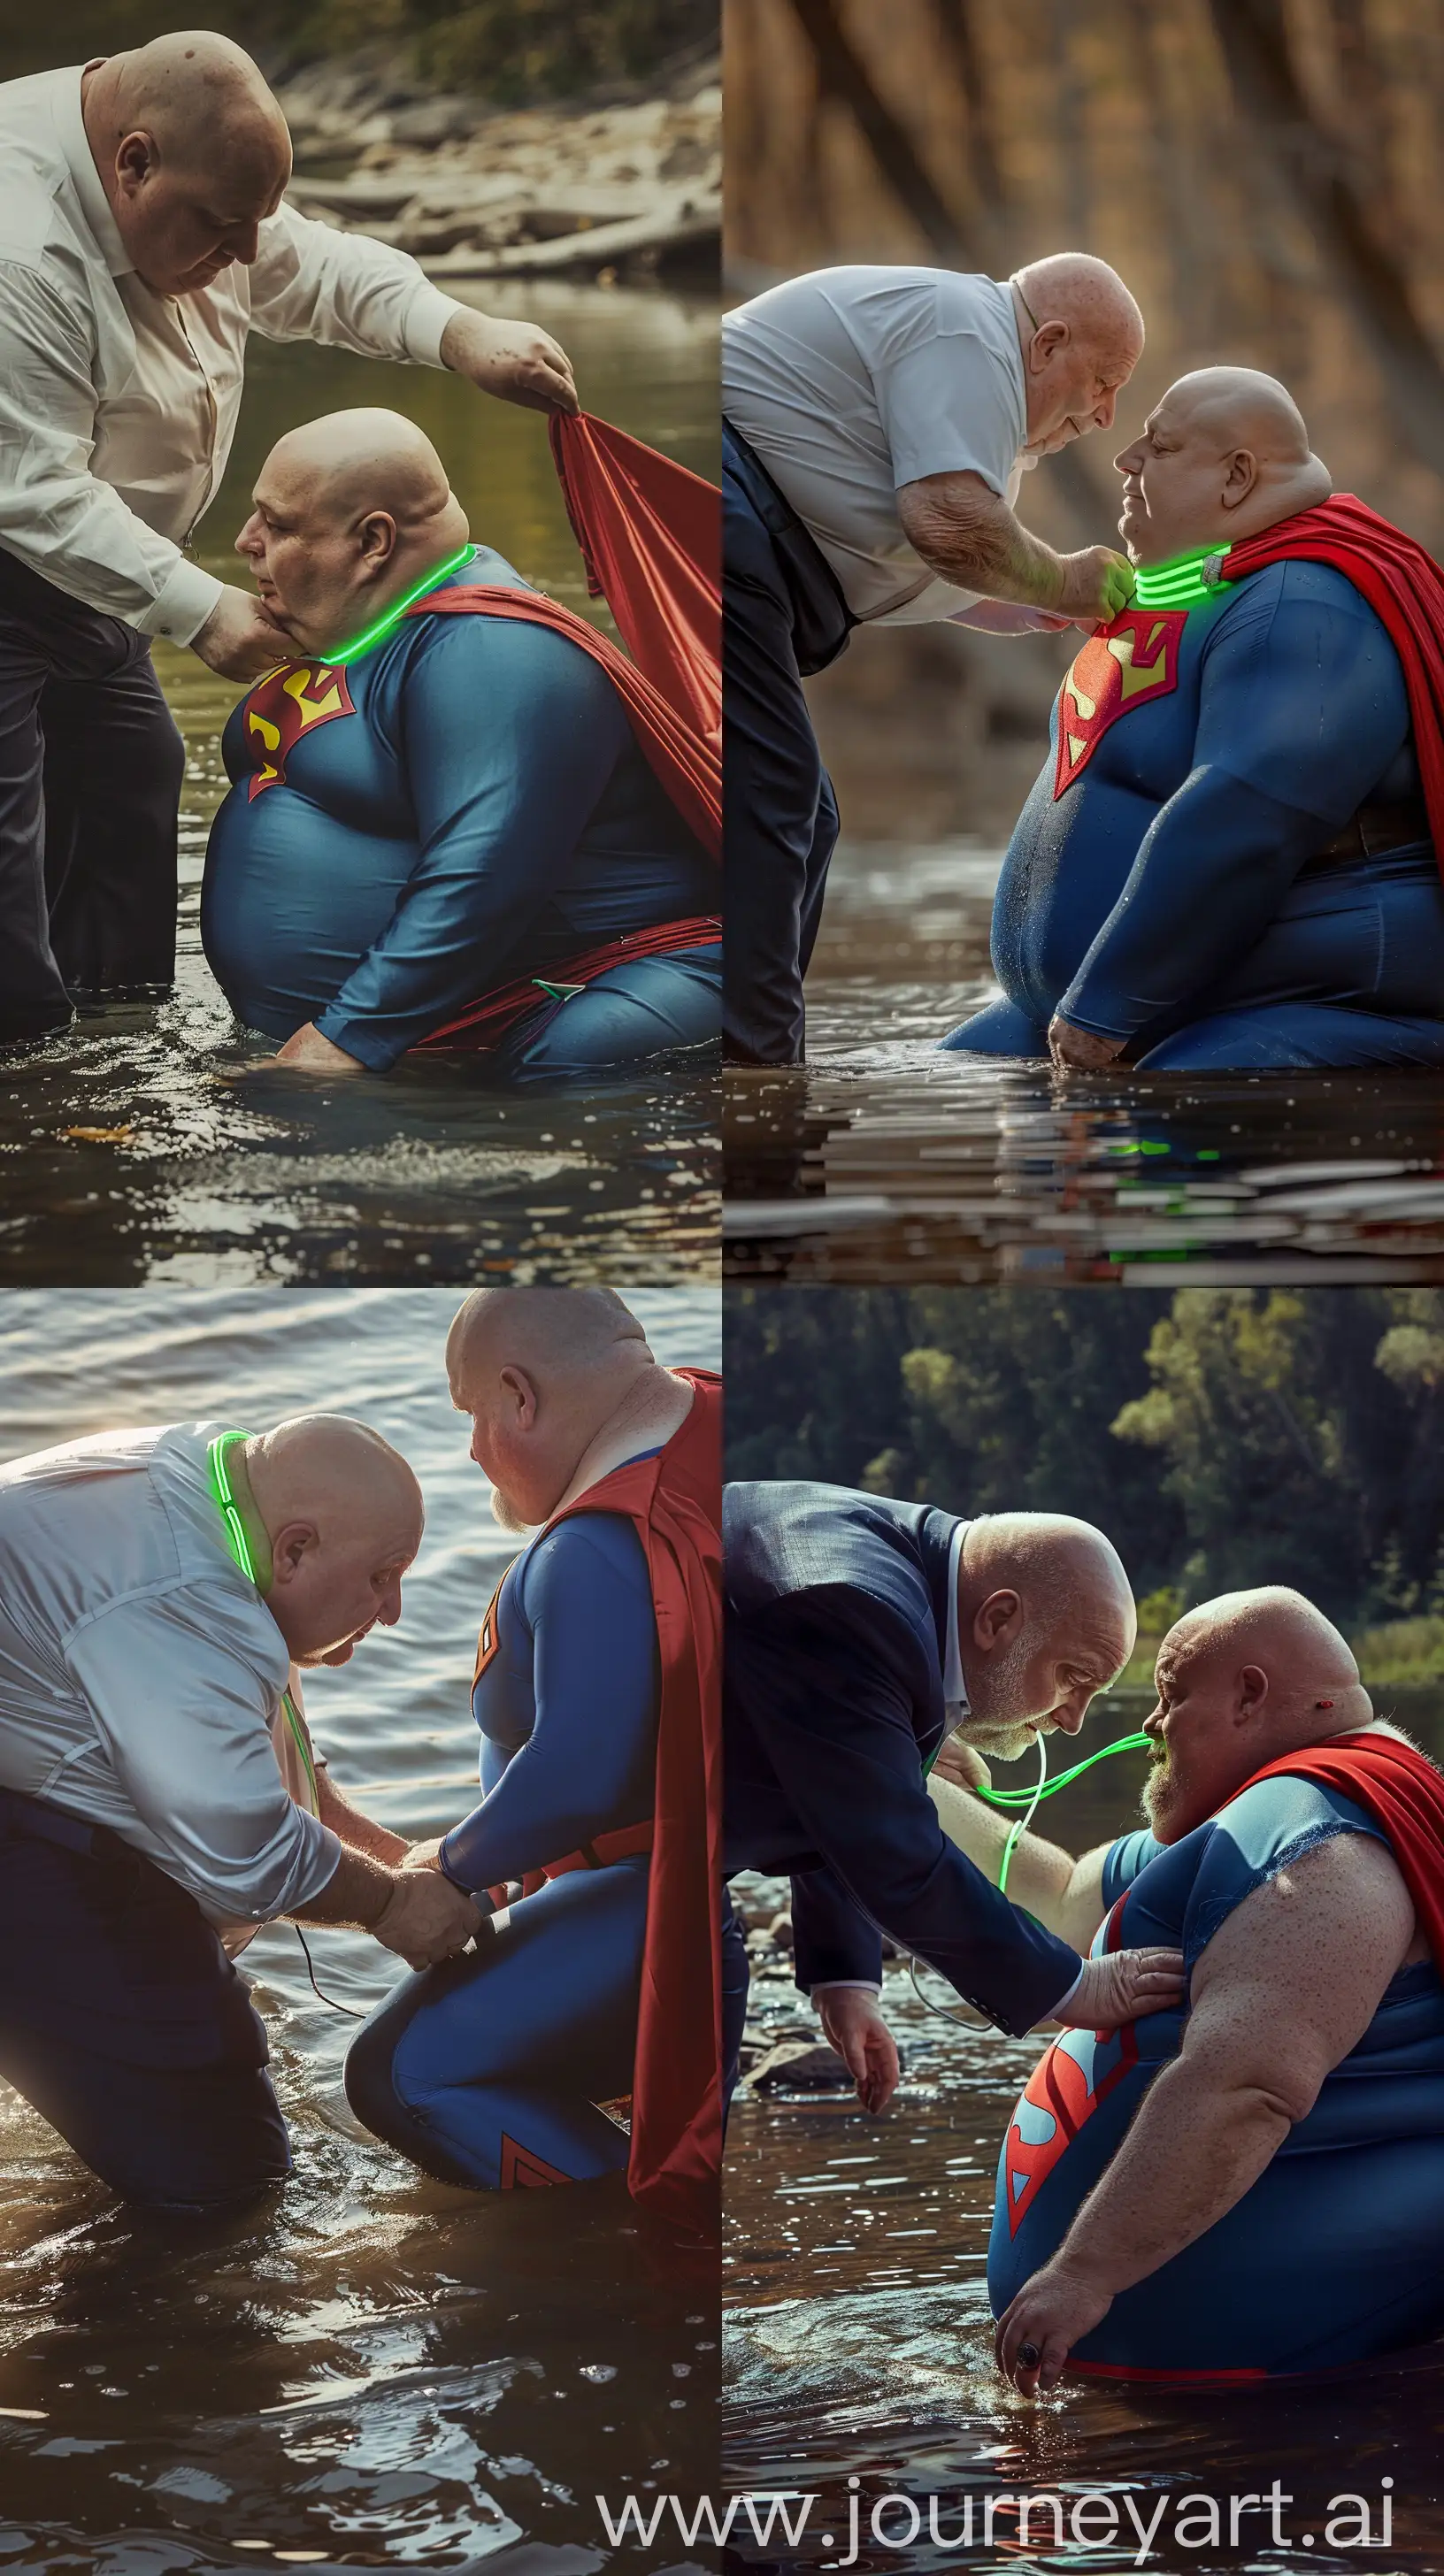 Elderly-Men-in-Playful-Act-Neon-Collar-and-Superman-Suit-in-River